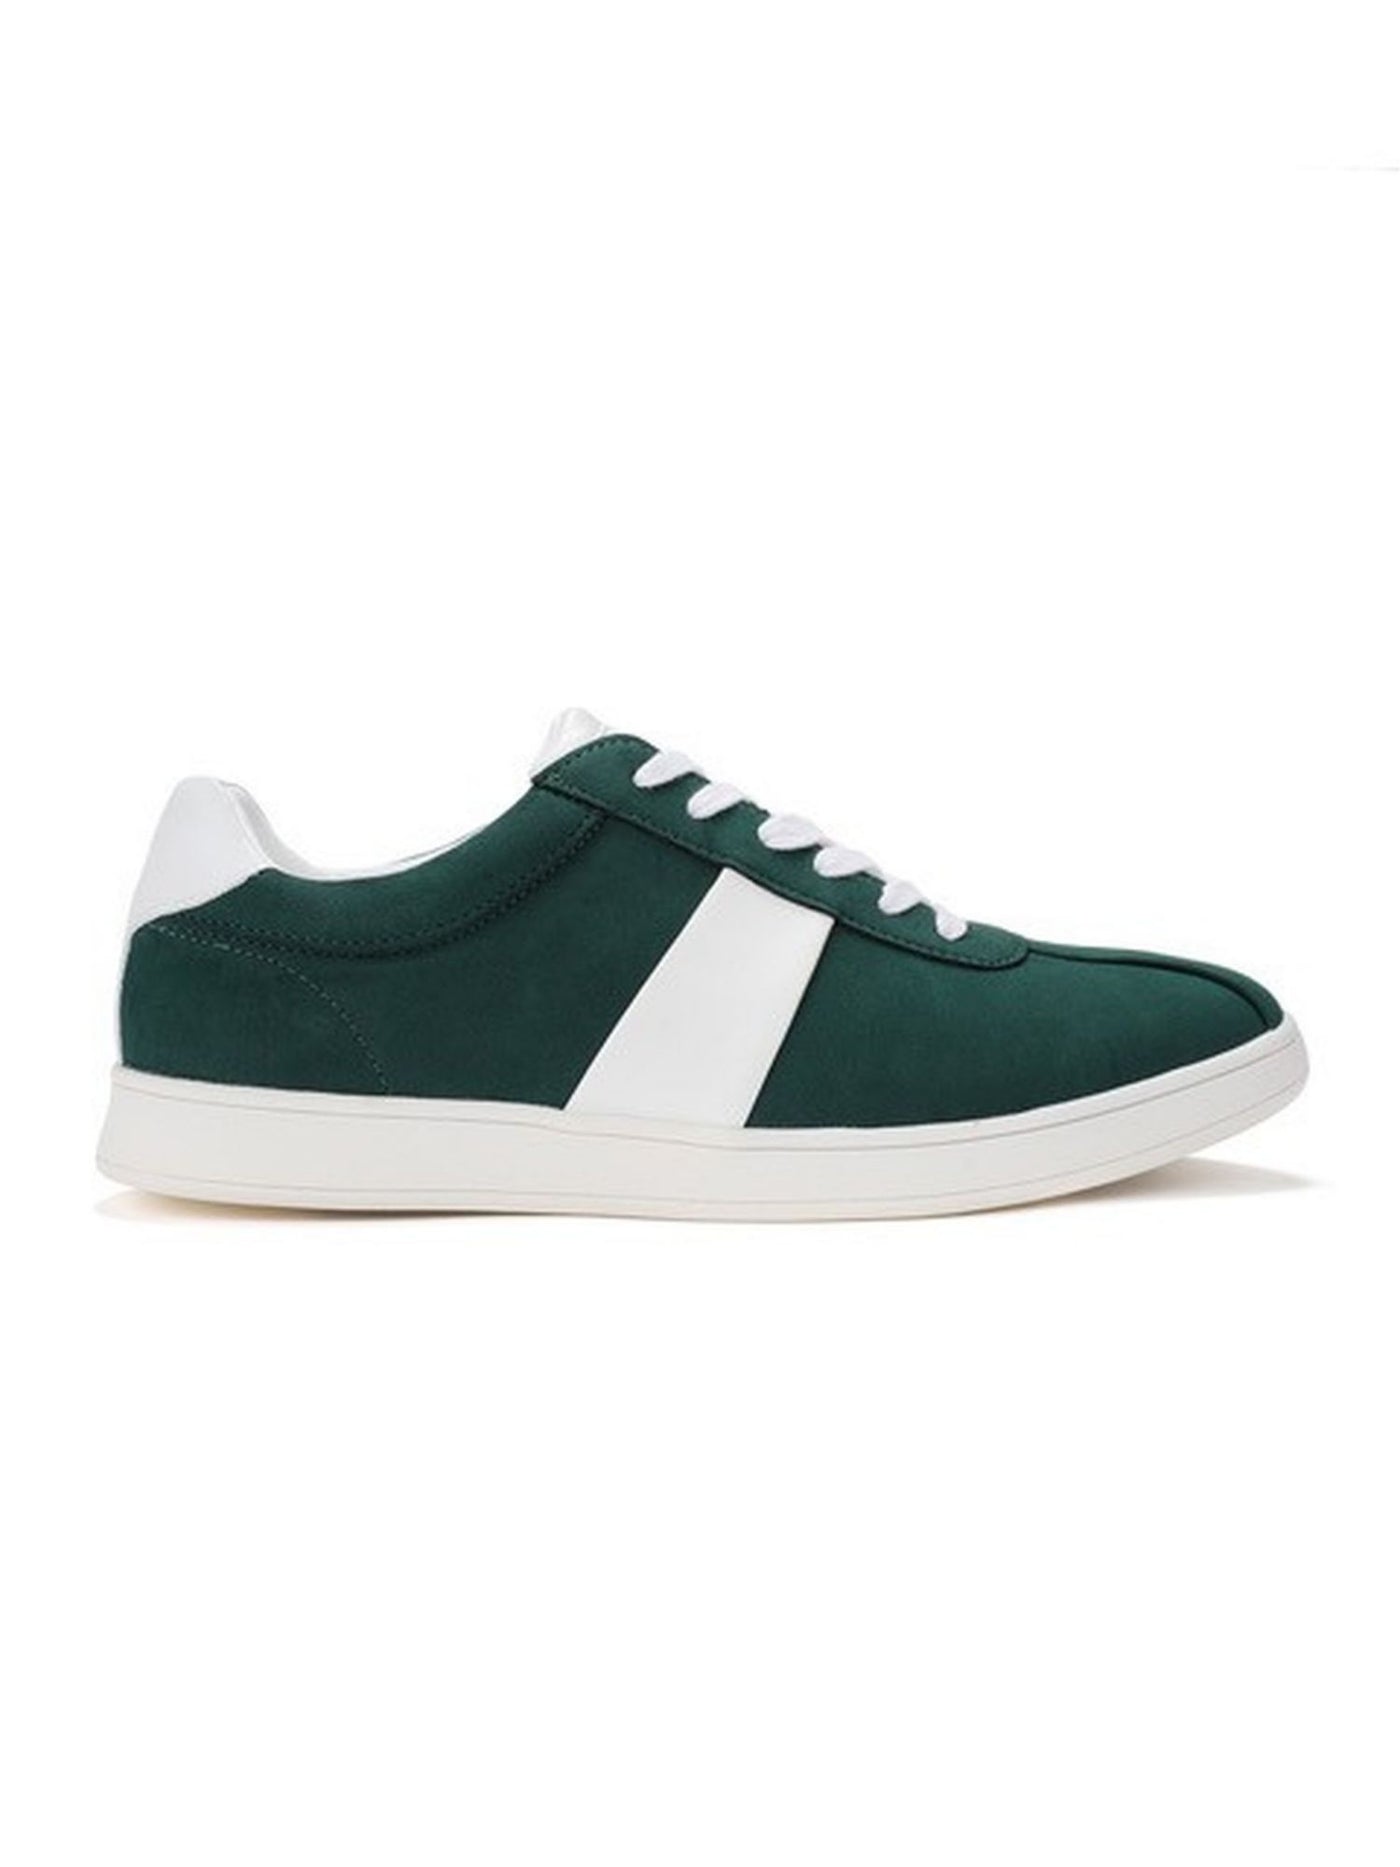 CLUBROOM Mens Green Comfort Edwin Round Toe Platform Lace-Up Athletic Sneakers Shoes 10 M